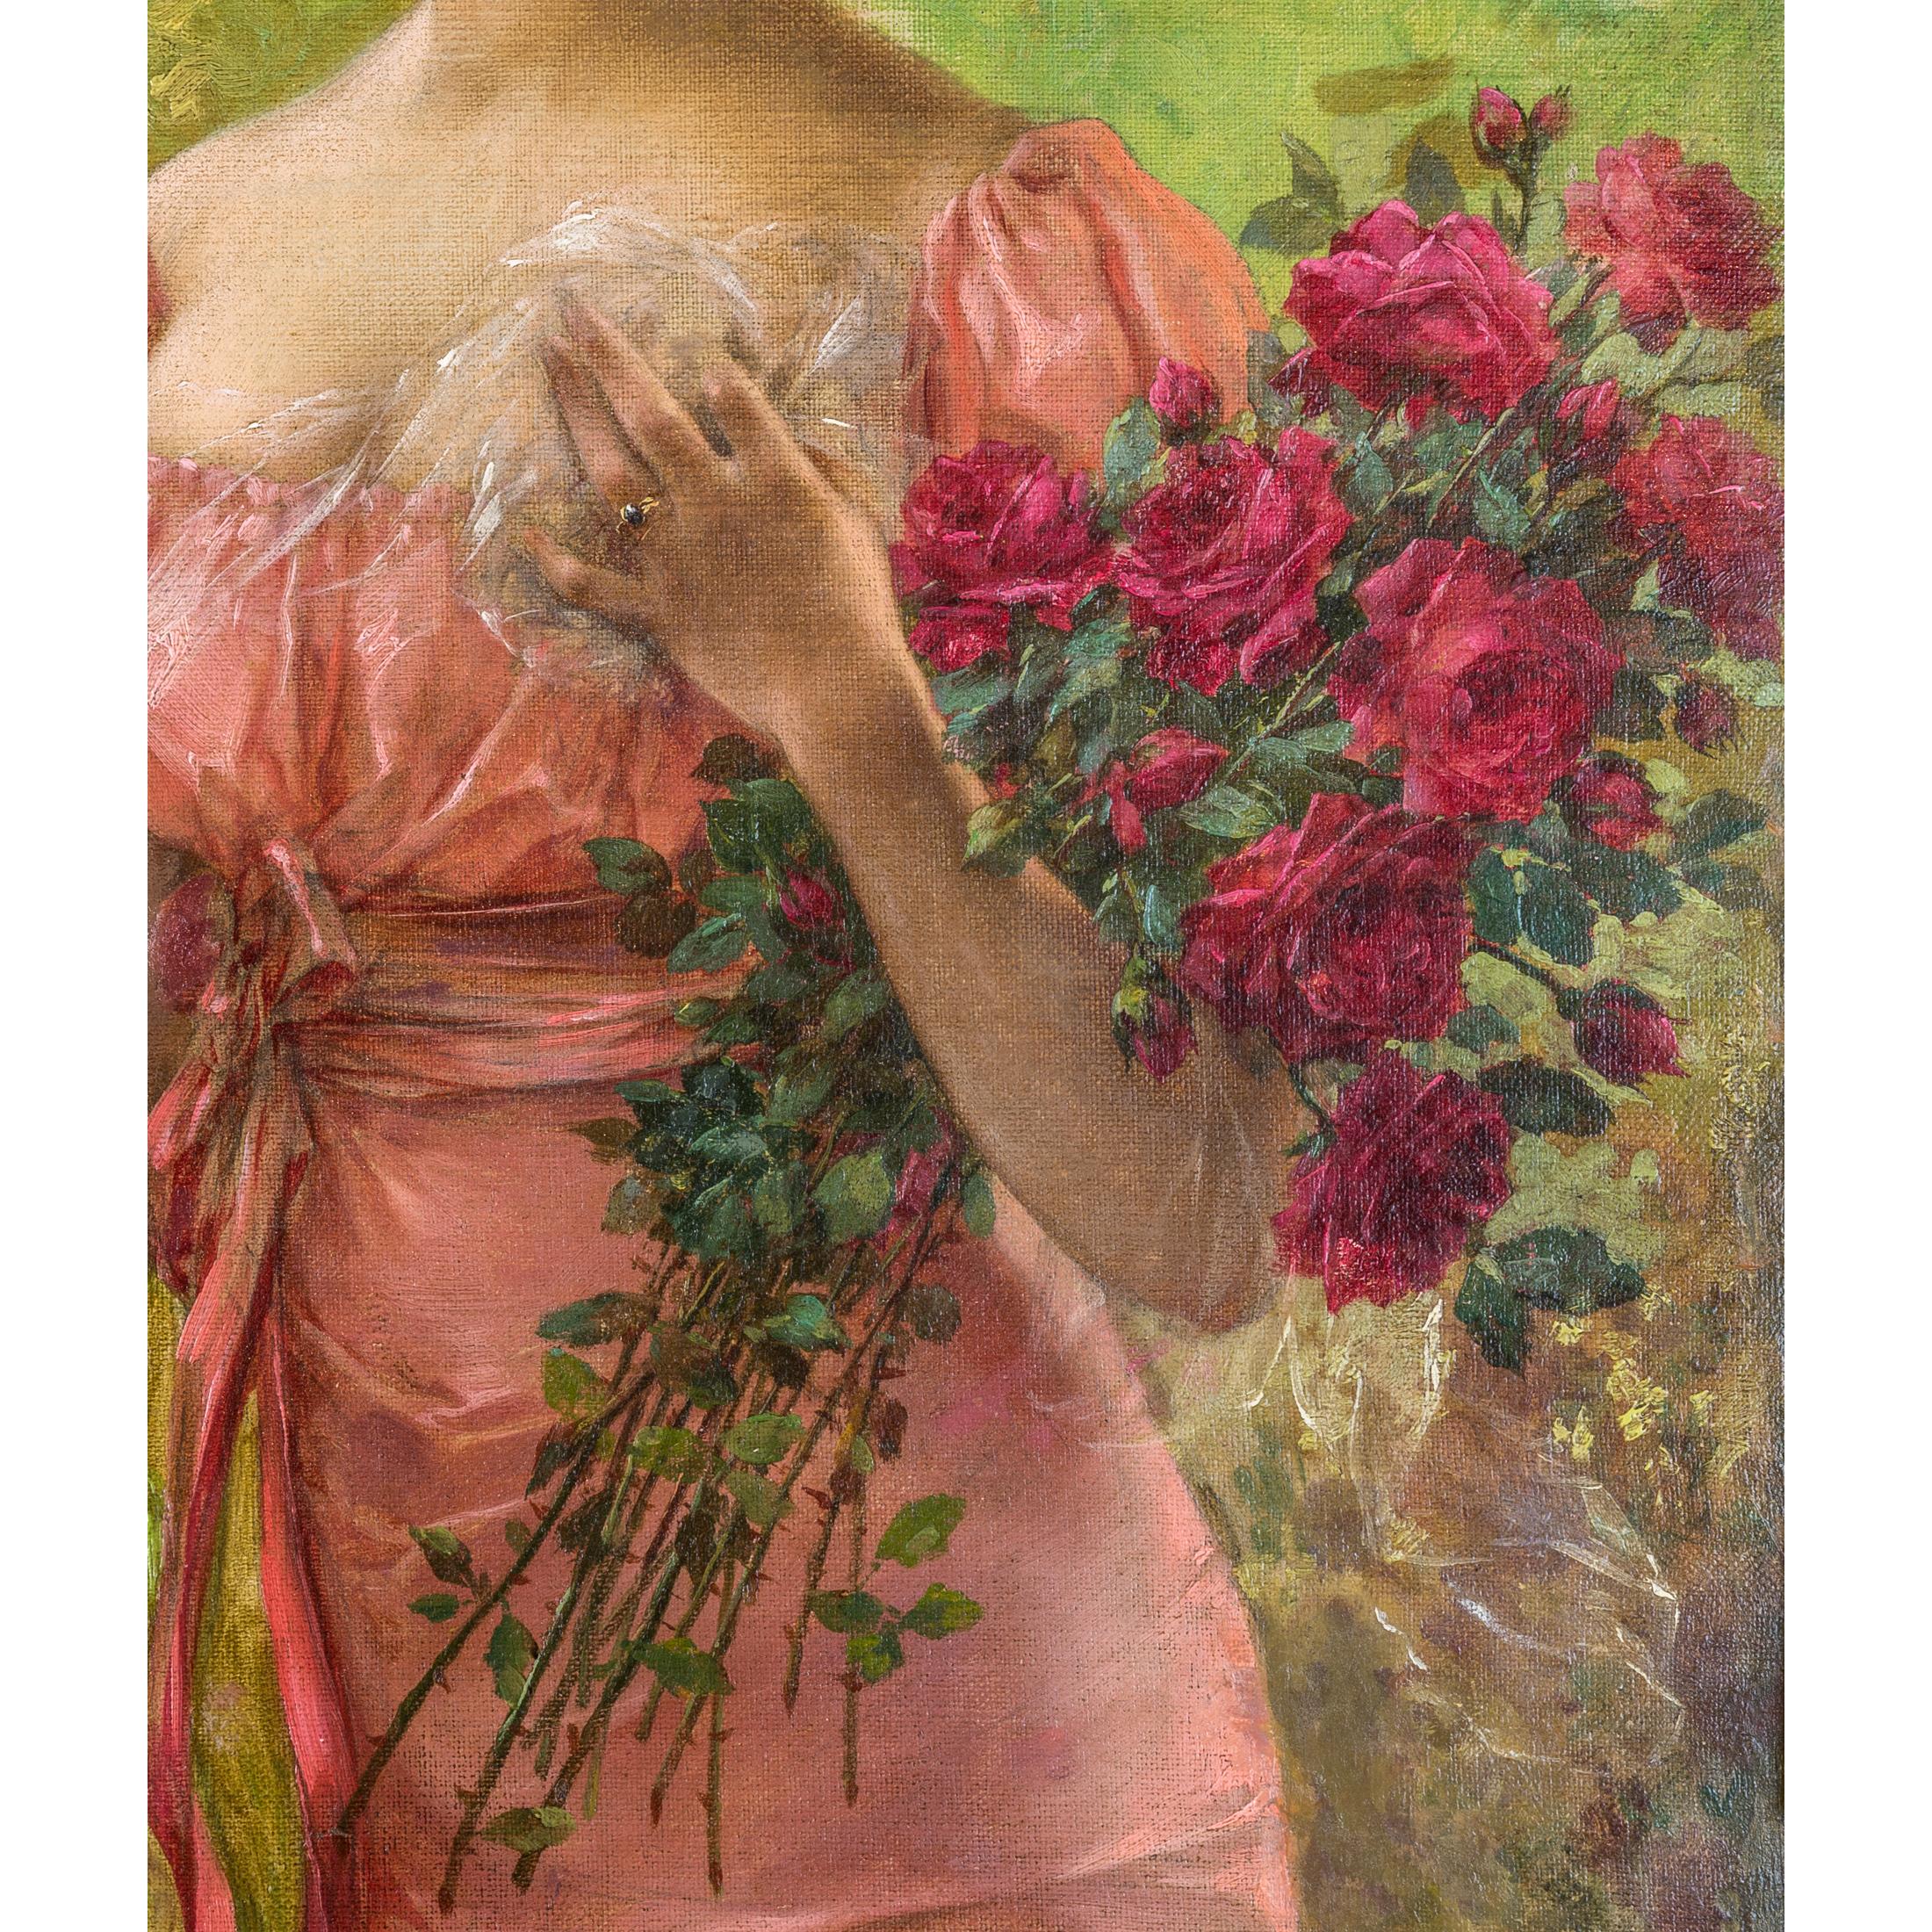 French Fine Portrait of a Young Beauty Holding a Bouquet of Roses by Emile Vernon